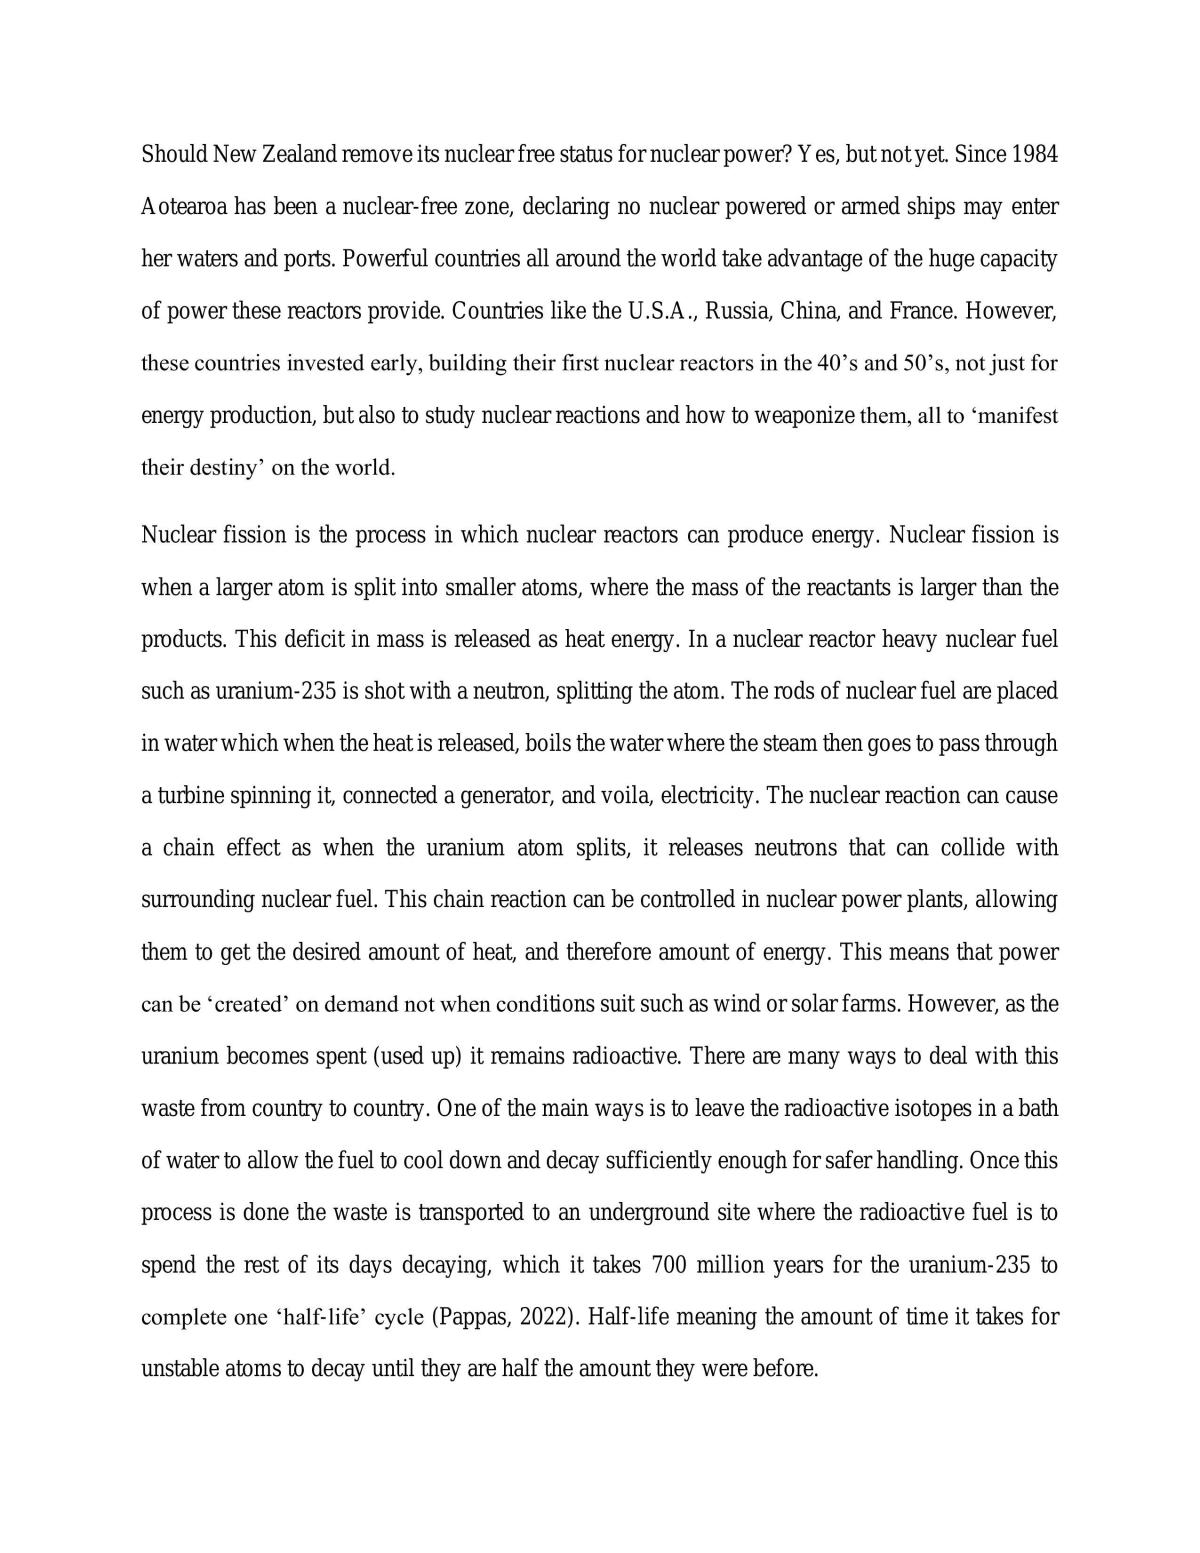 Essay on Nuclear Power in New Zealand - Page 1